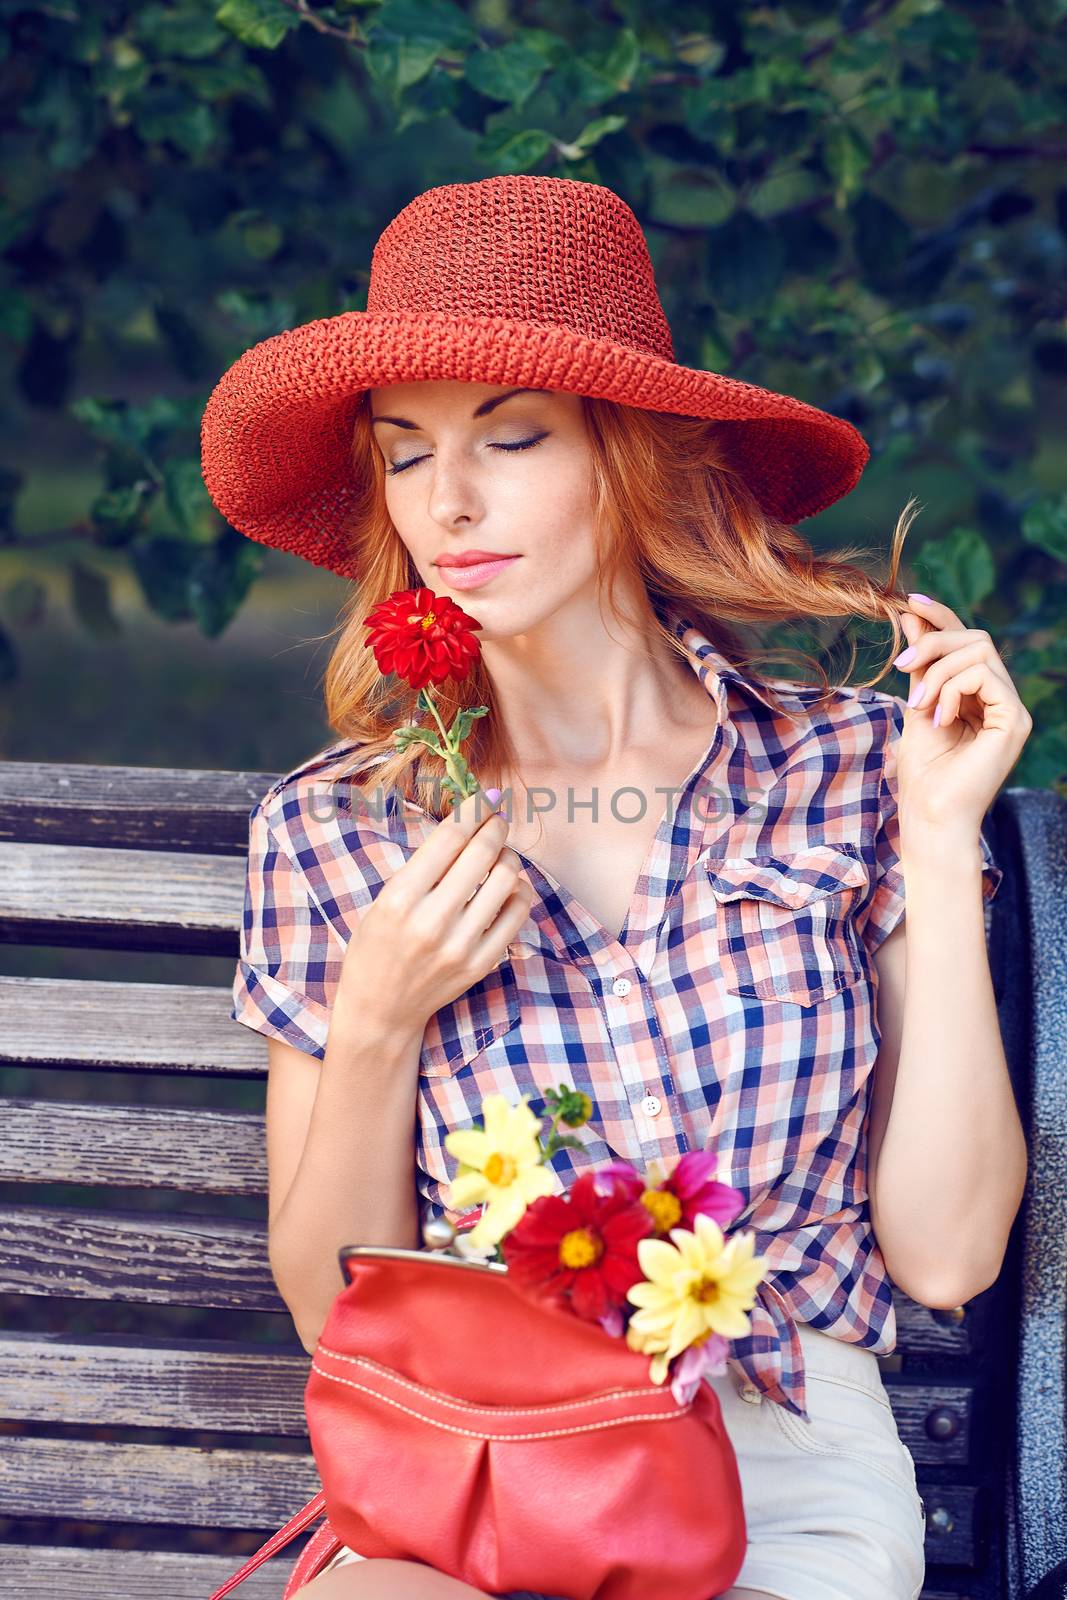 Beauty portrait of stylish playful woman with closed eyes on bench in park, people, outdoors. Attractive happy girl in fashionable clothes, hat enjoying flower and nature in summer garden, lifestyle